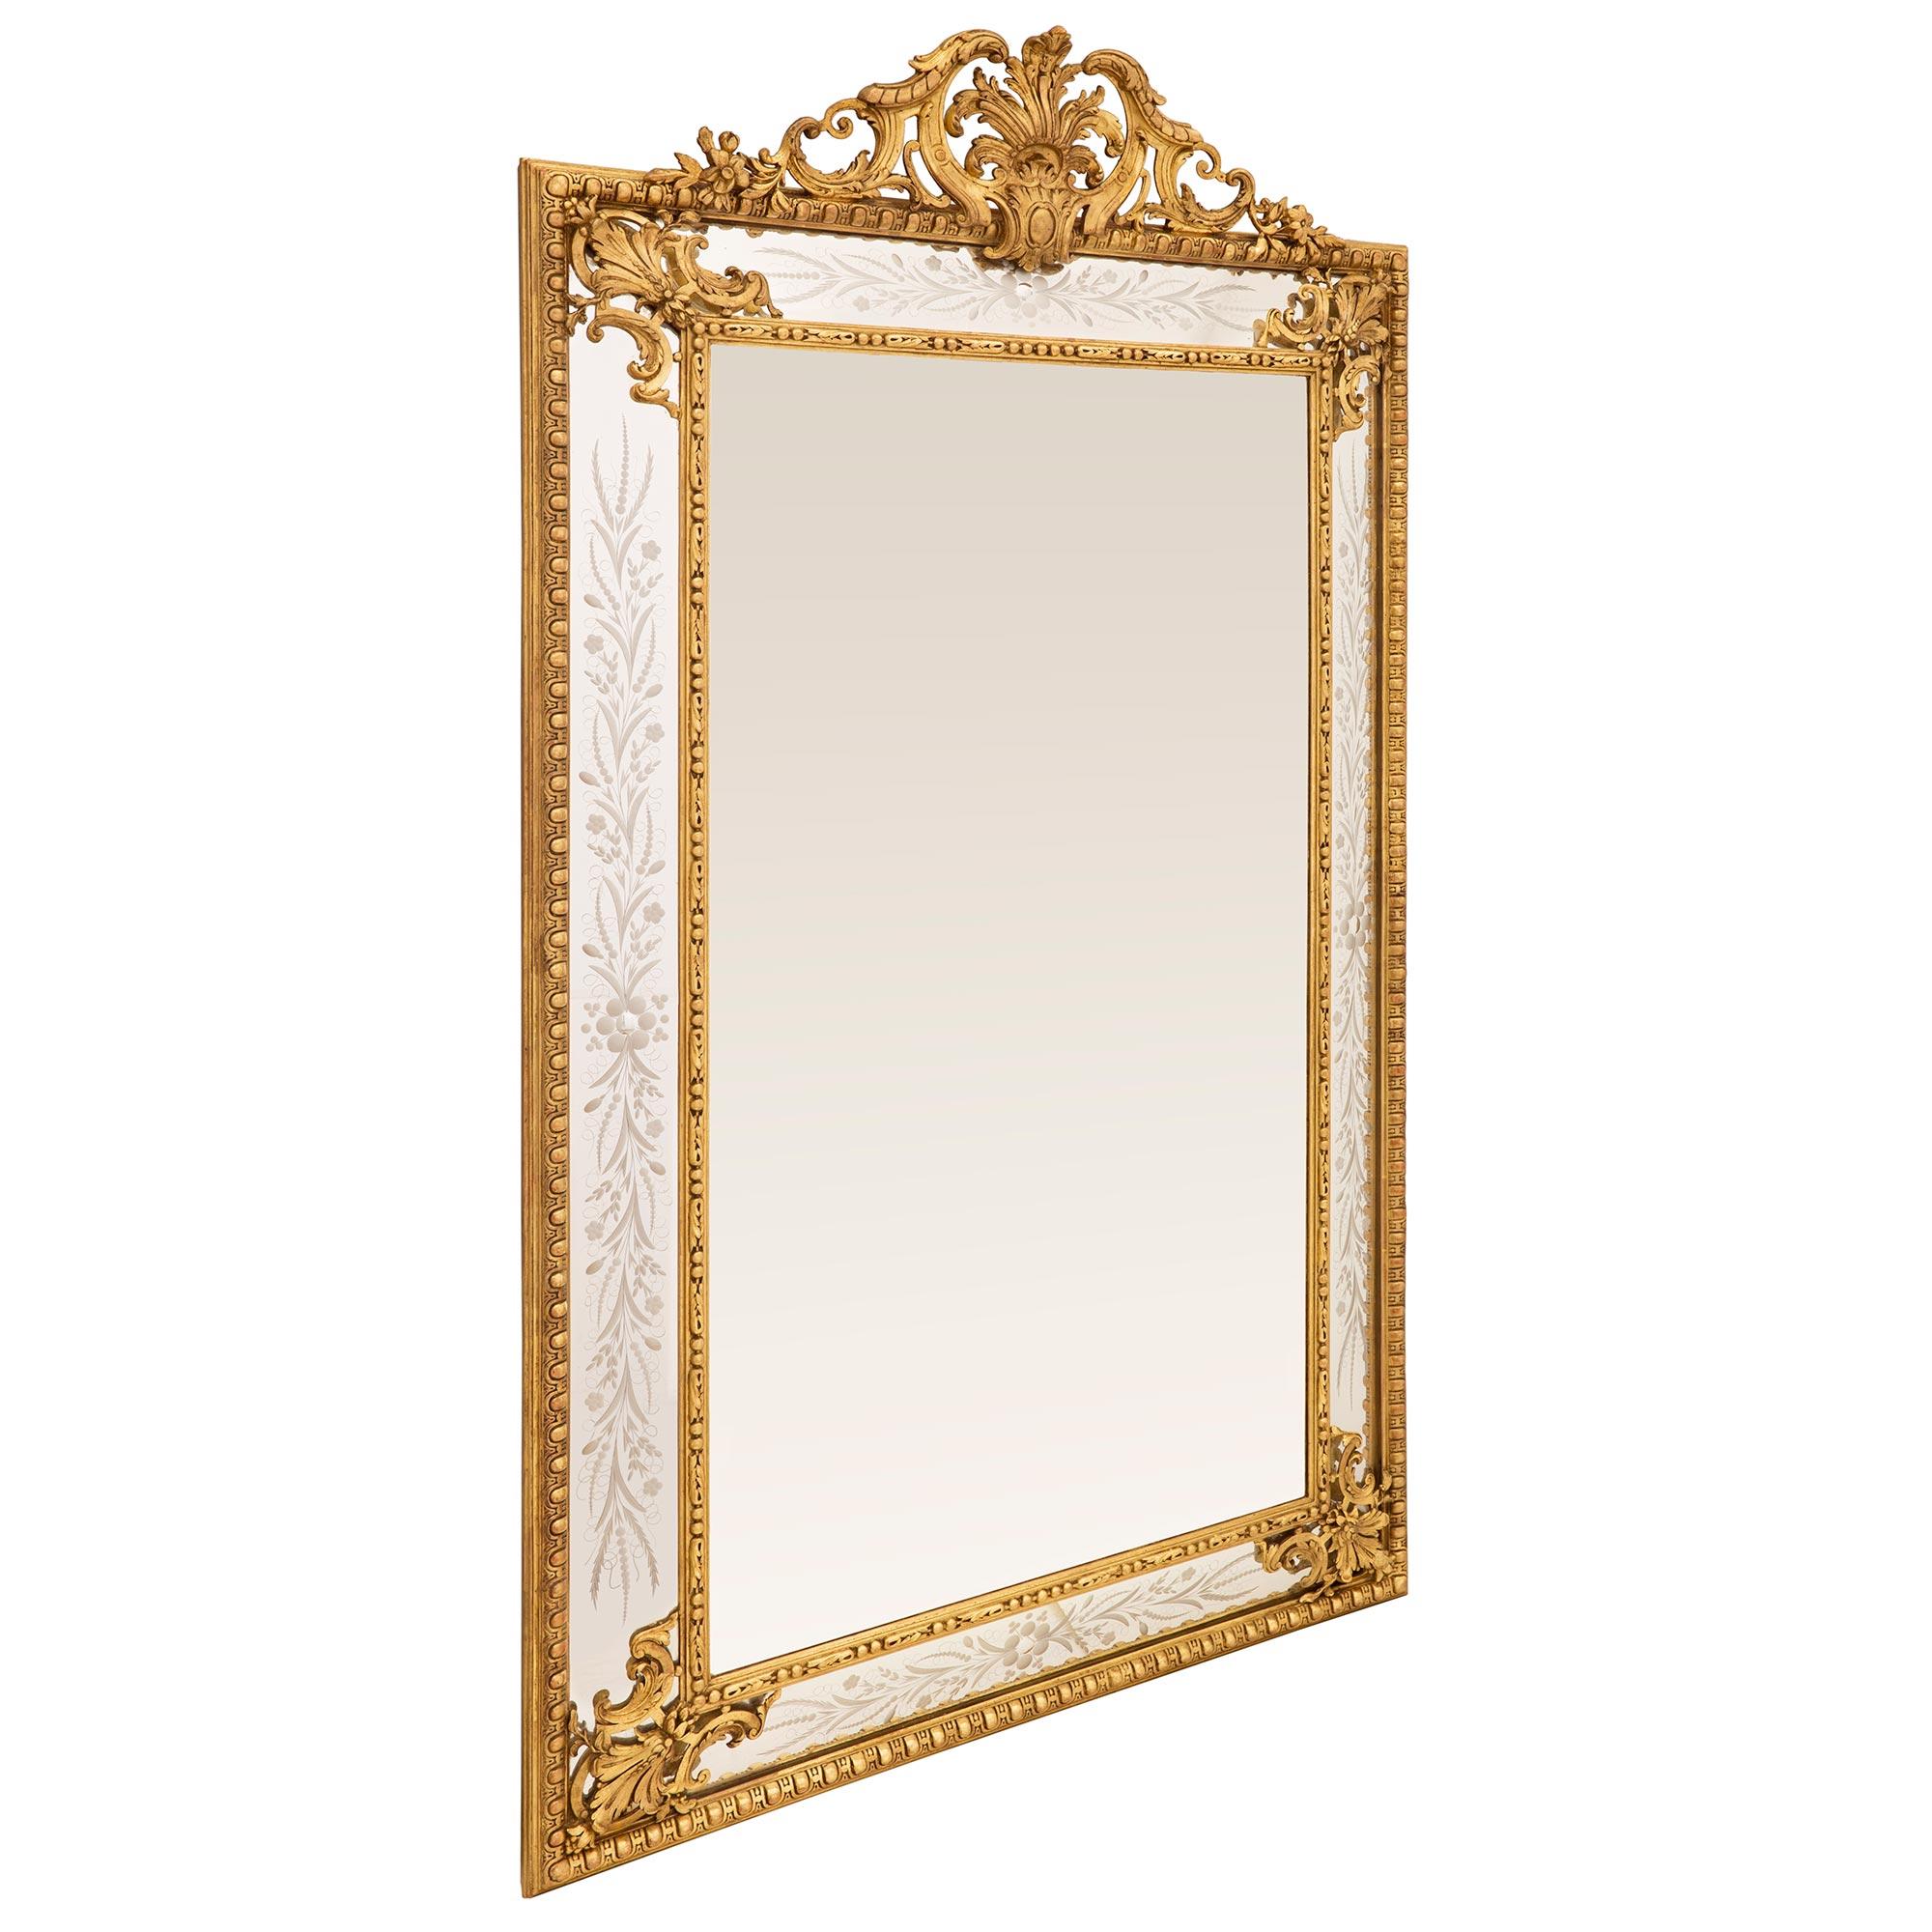 A stunning and extremely decorative French 19th century Louis XVI st. double framed giltwood mirror. The central original mirror plate is set within a lovely beaded and foliate band. The all original outer mirror plates are each decorated with